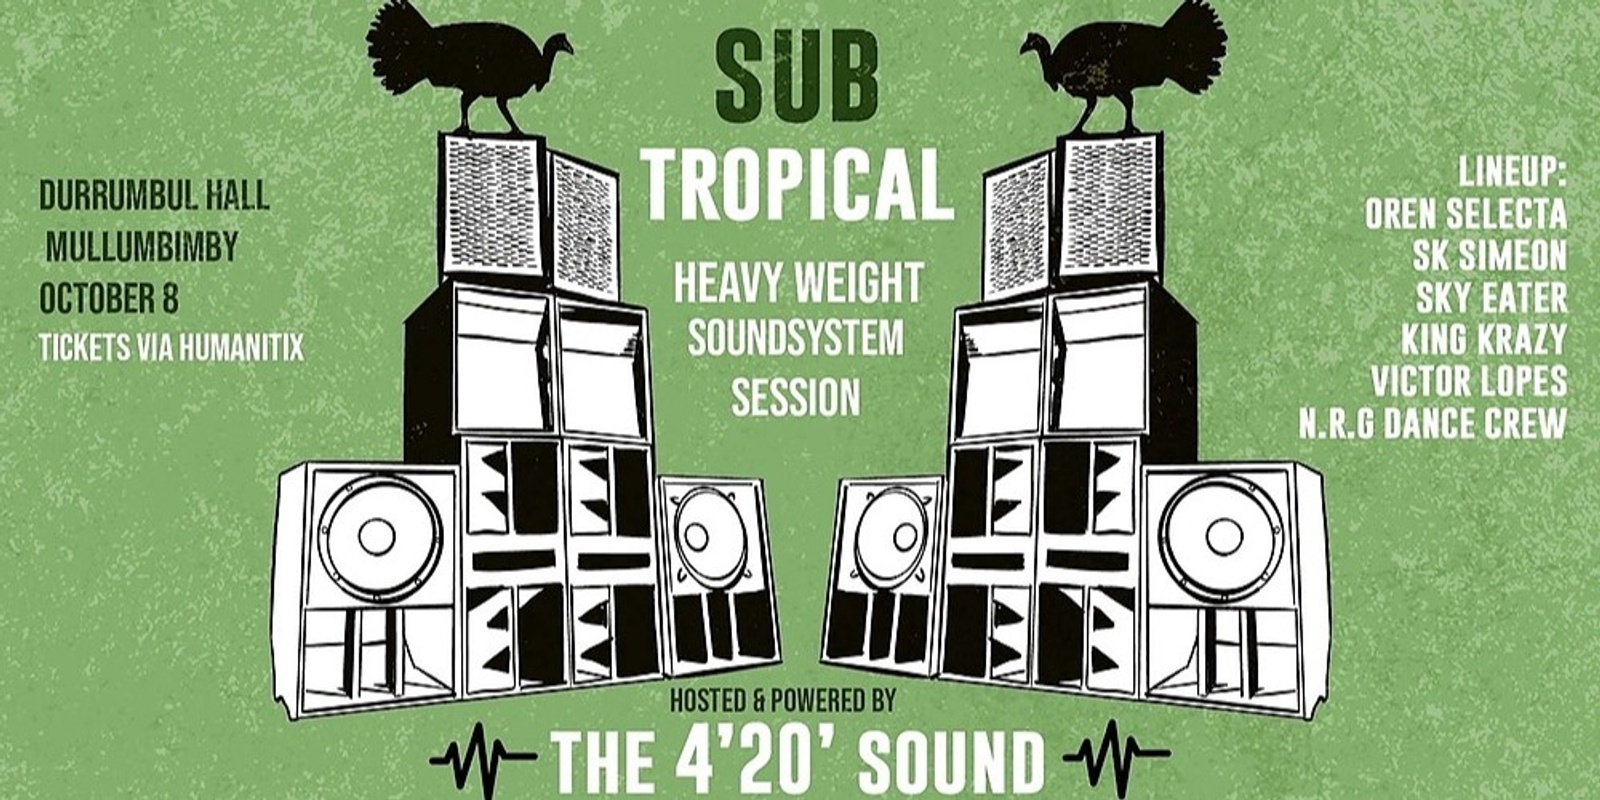 Banner image for Sub Tropical - Heavy Weight Sound System Session powered by The 4'20' Sound